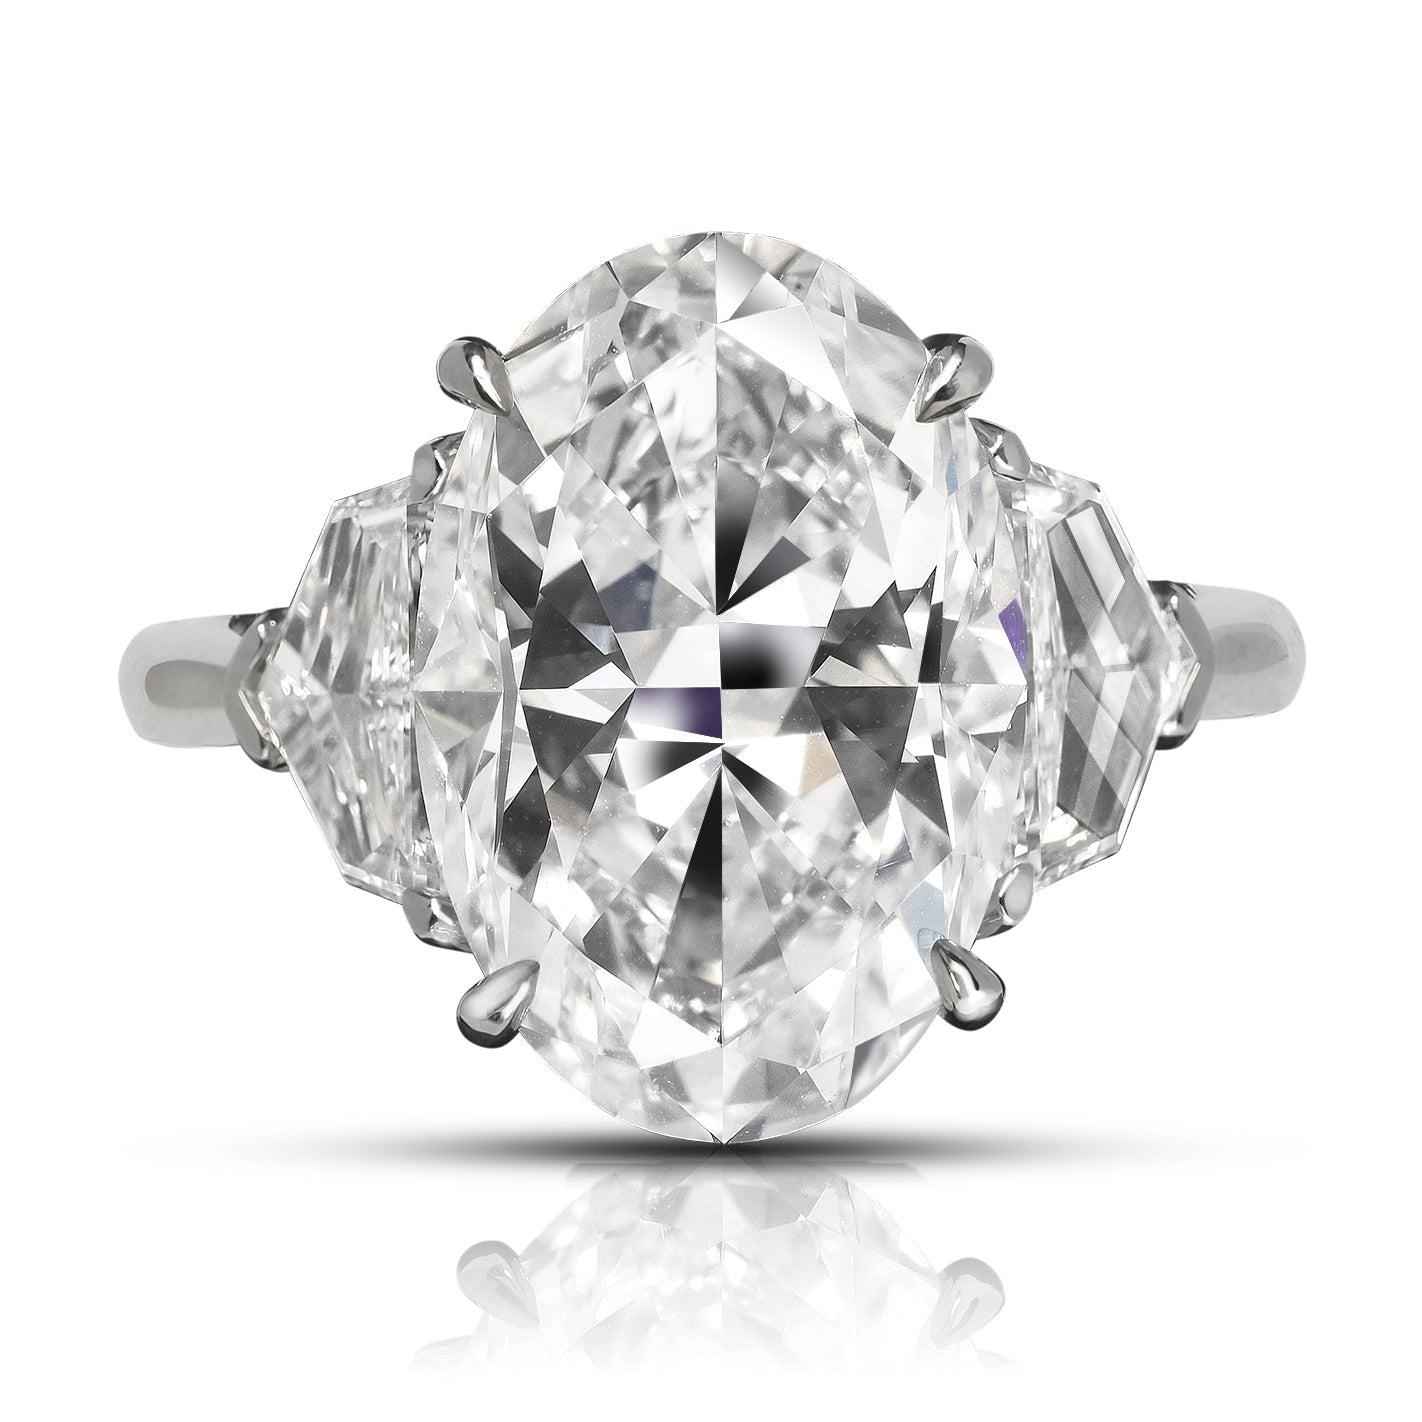 JASMINE DIAMOND ENGAGEMENT PLATINUM RING BY MIKE NEKTA
GIA CERTIFIED

Center Diamond:
Carat Weight: 6.5 Carat
Color: D*
Clarity: VVS1
Style: OVAL
Measurement:  14.8 x 10.0 x 6.6 mm

* This diamond has been treated by one or more processes to change